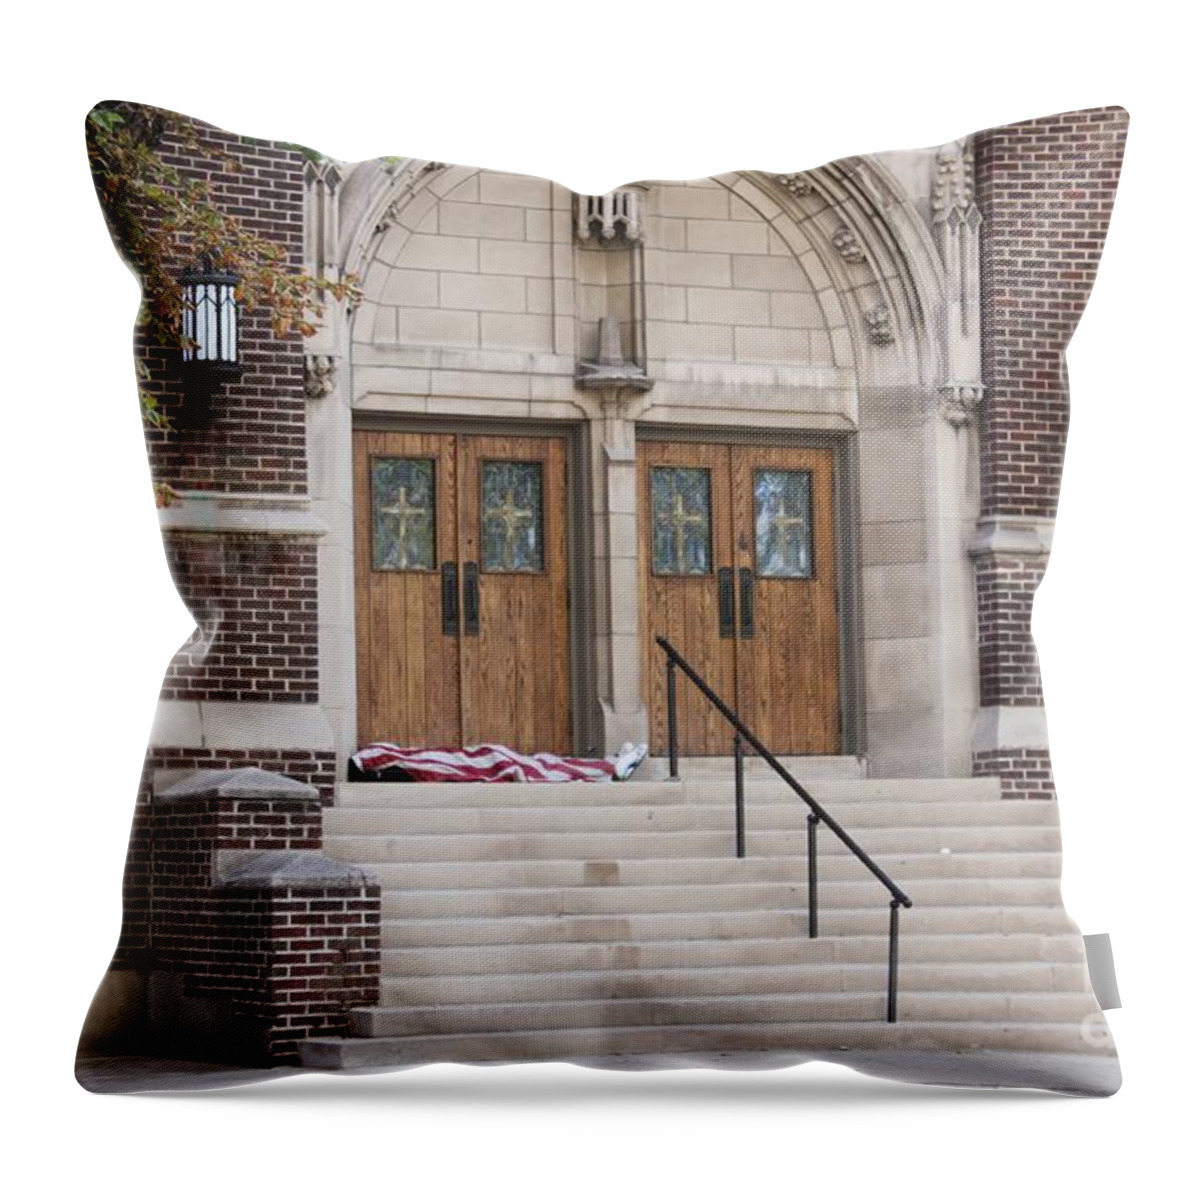 Homeless Throw Pillow featuring the photograph America The Beautiful by Janice Pariza